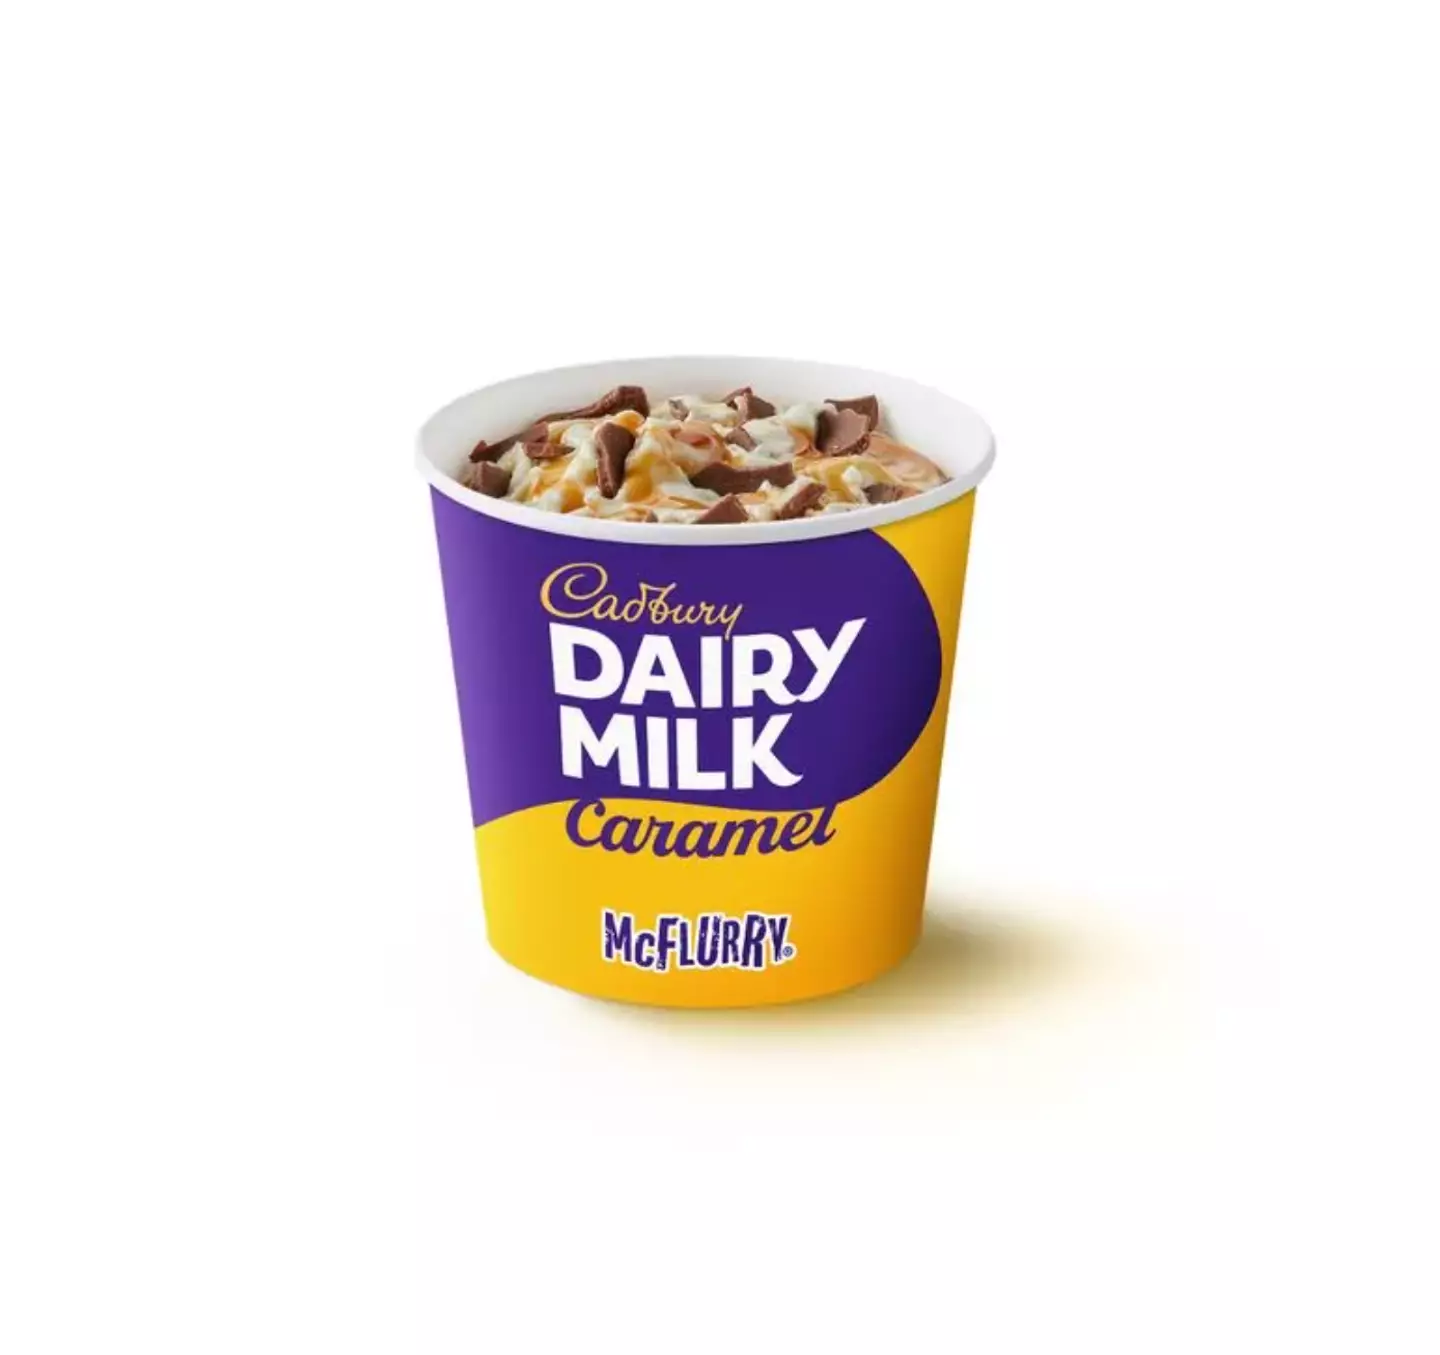 A Cadbury Caramel McFlurry if you're after something sweet.